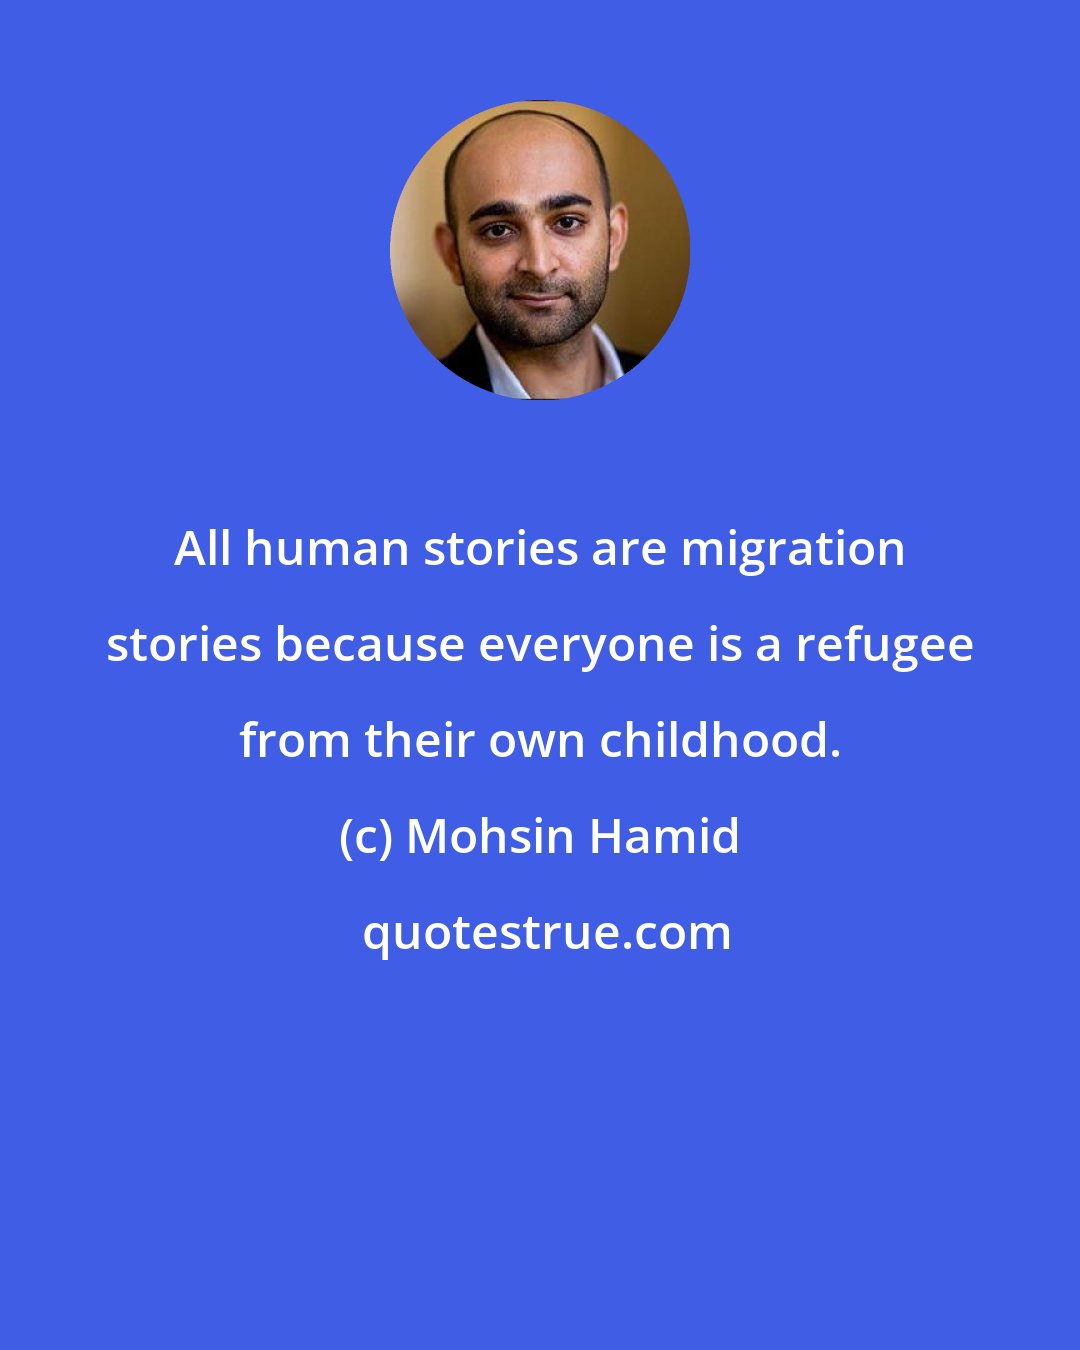 Mohsin Hamid: All human stories are migration stories because everyone is a refugee from their own childhood.